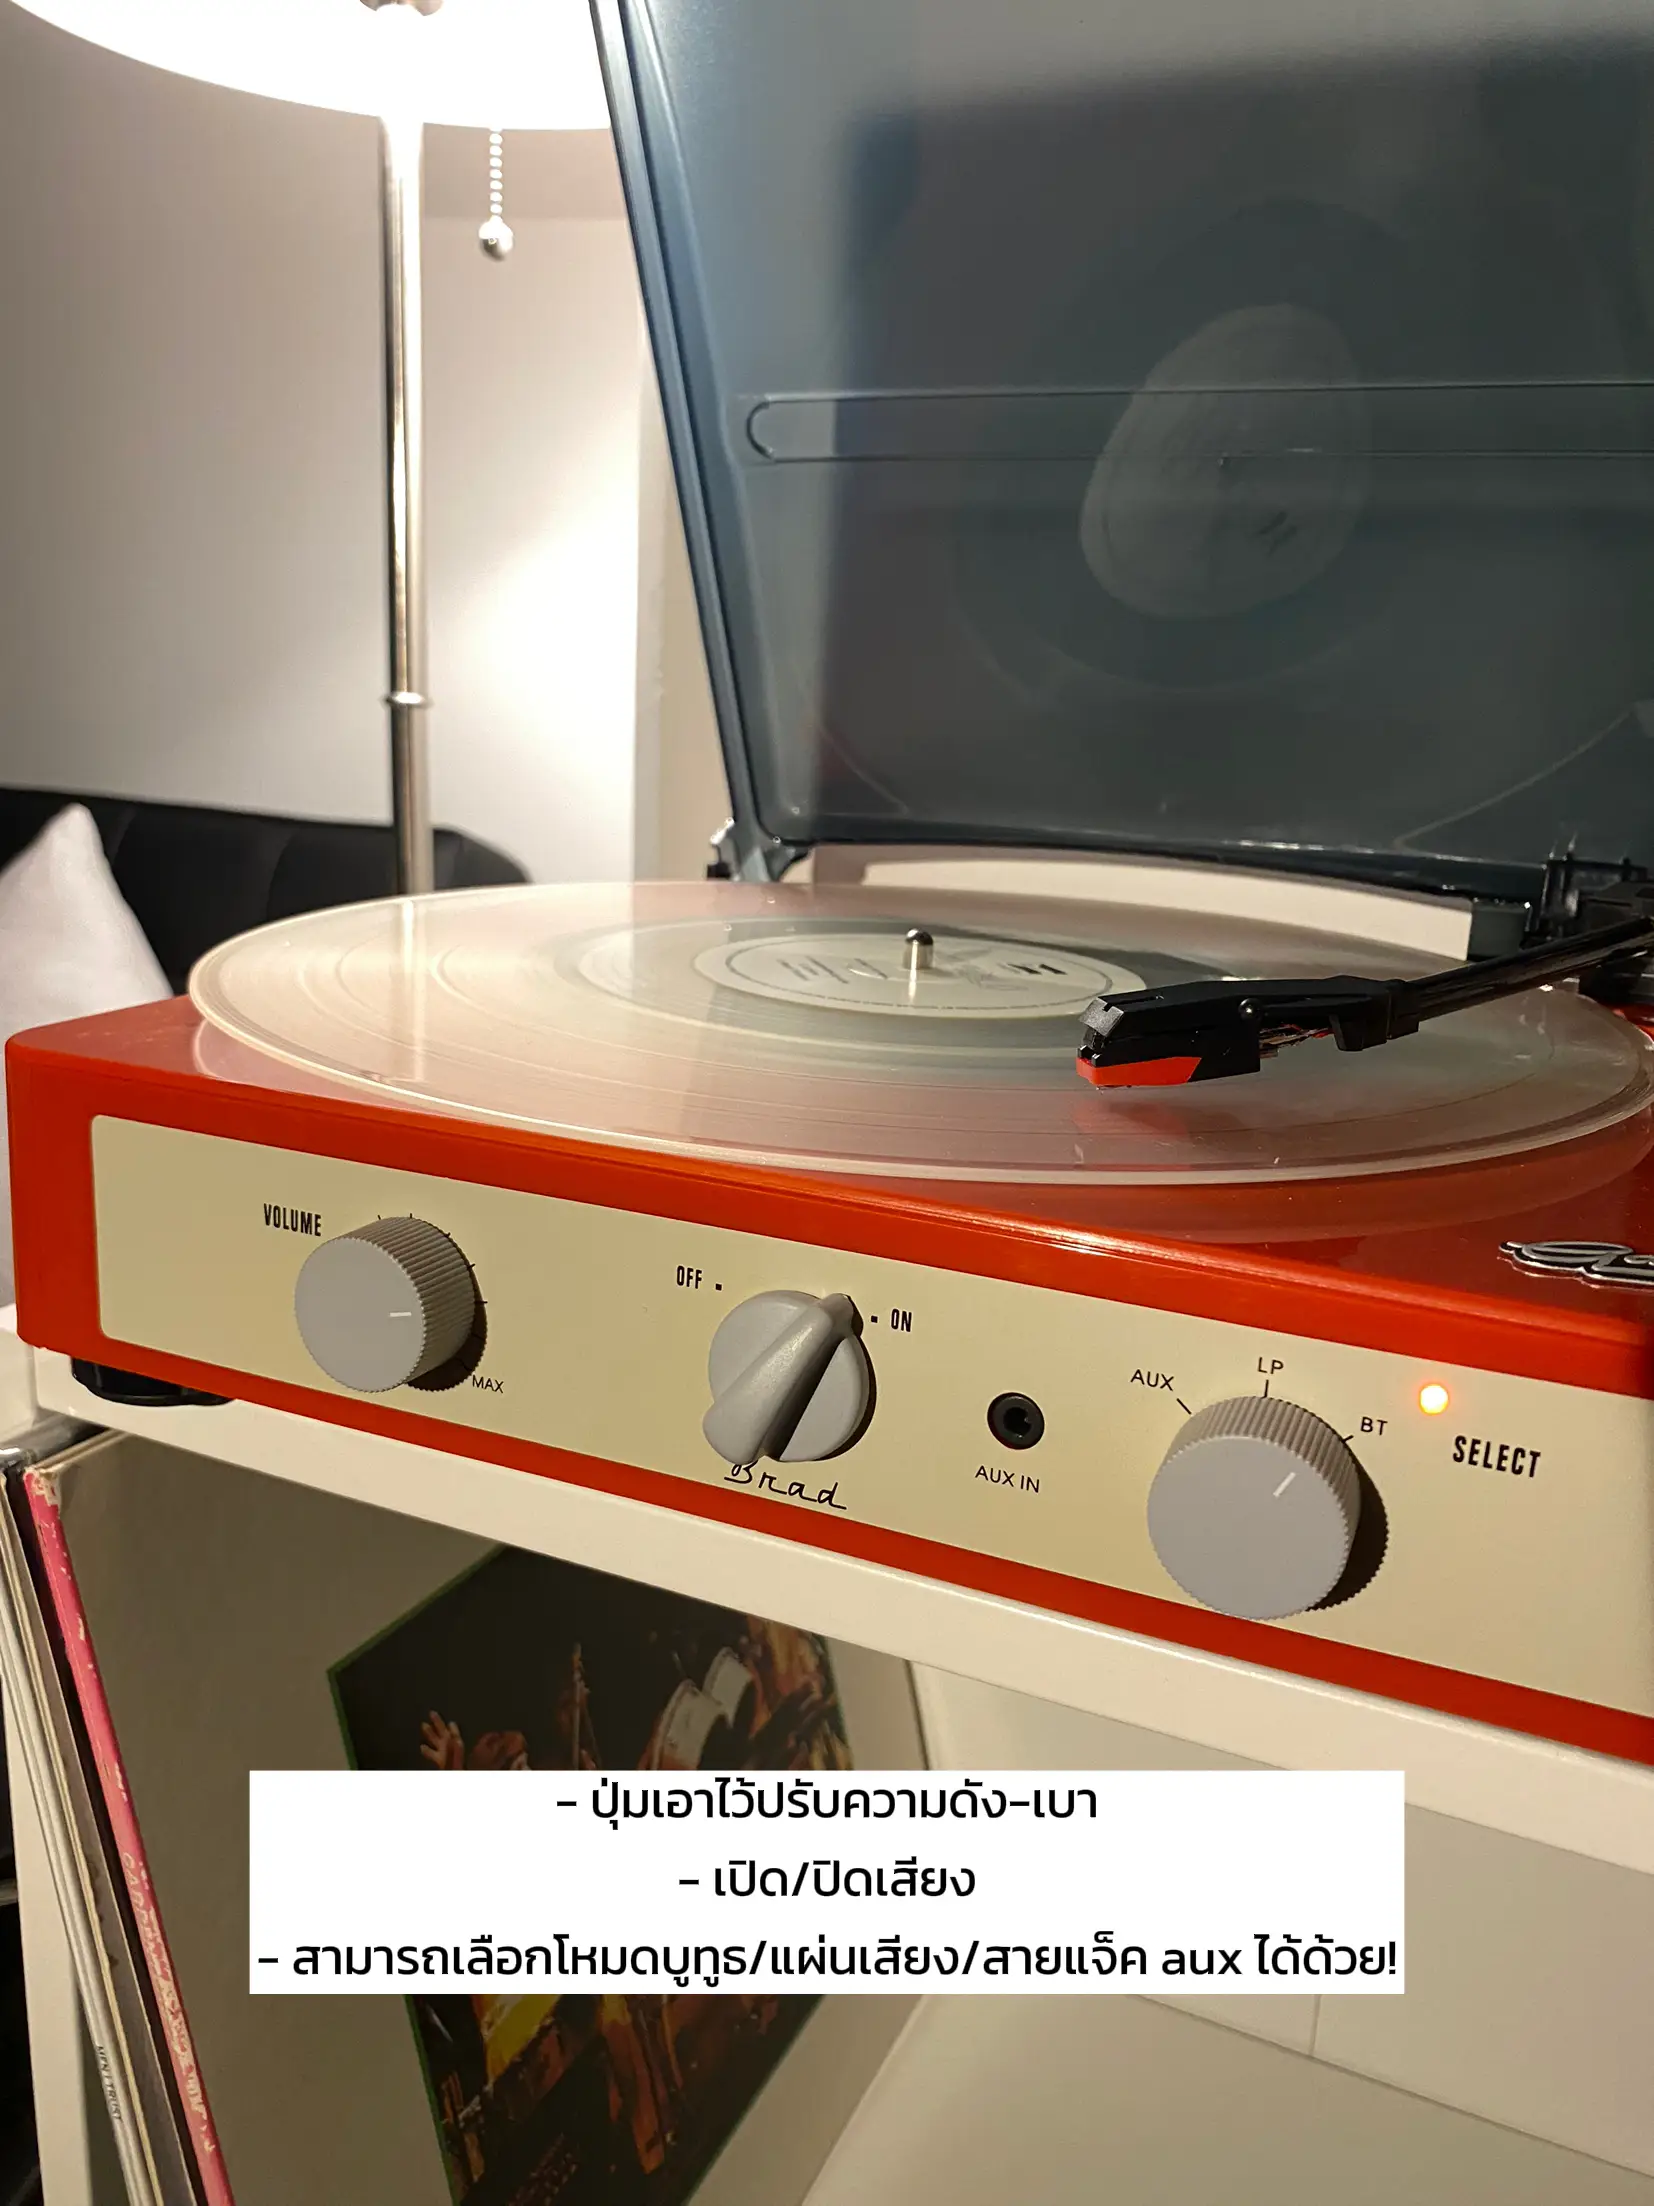 Review] Brad Retro Model Gadhouse Turntable 🎶🤔 | Gallery posted